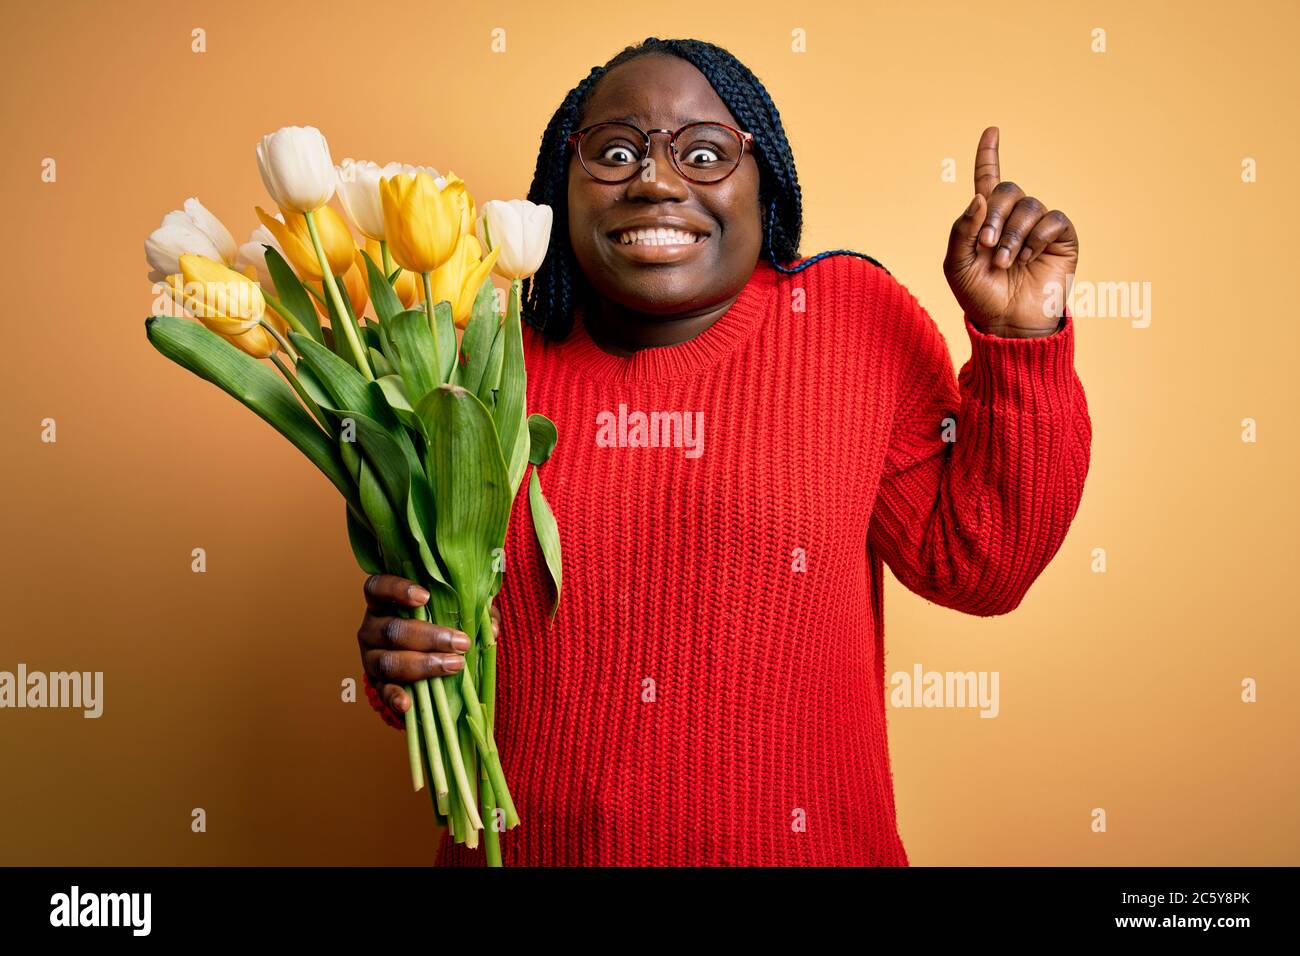 Young african american plus size woman with braids holding bouquet of yellow tulips flower smiling amazed and surprised and pointing up with fingers a Stock Photo